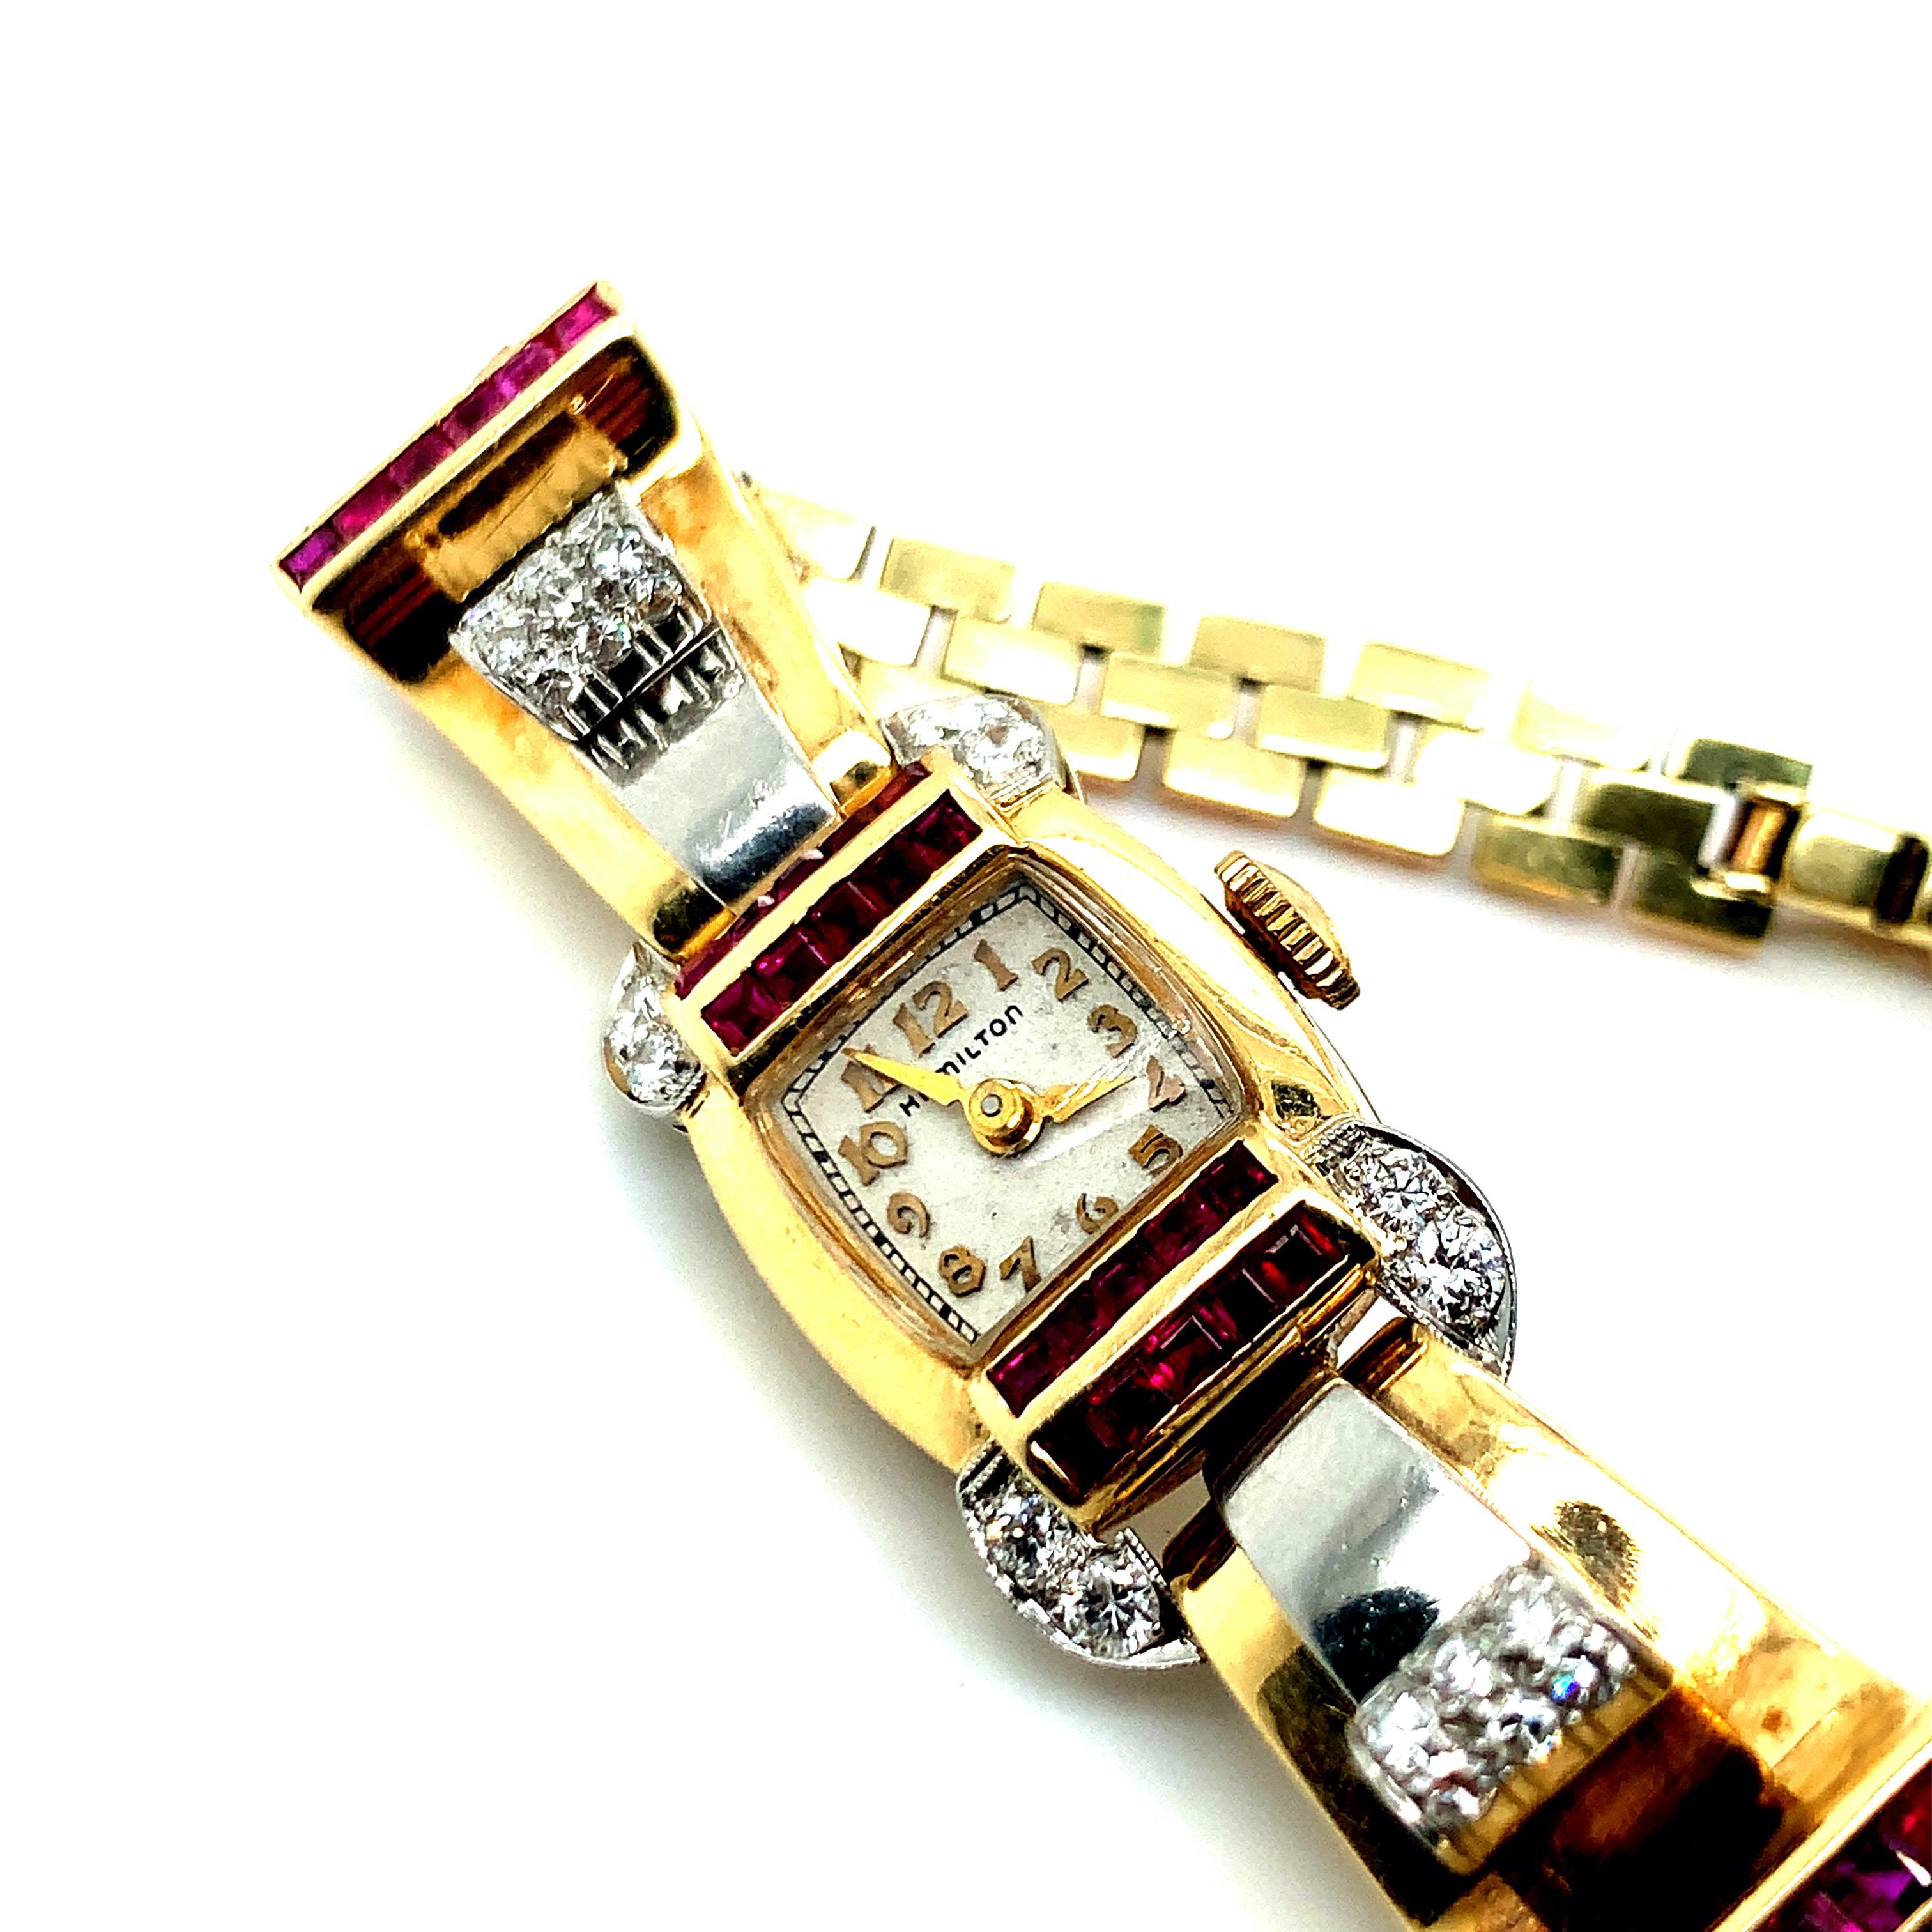 A 14 karat yellow, rose, and white gold Hamilton watch with square white dial signed Hamilton, with 17 jewel stem wind and set movement within a 14 karat yellow, rose, and white gold case and bracelet set with thirty-two calibre-cut synthetic rubies